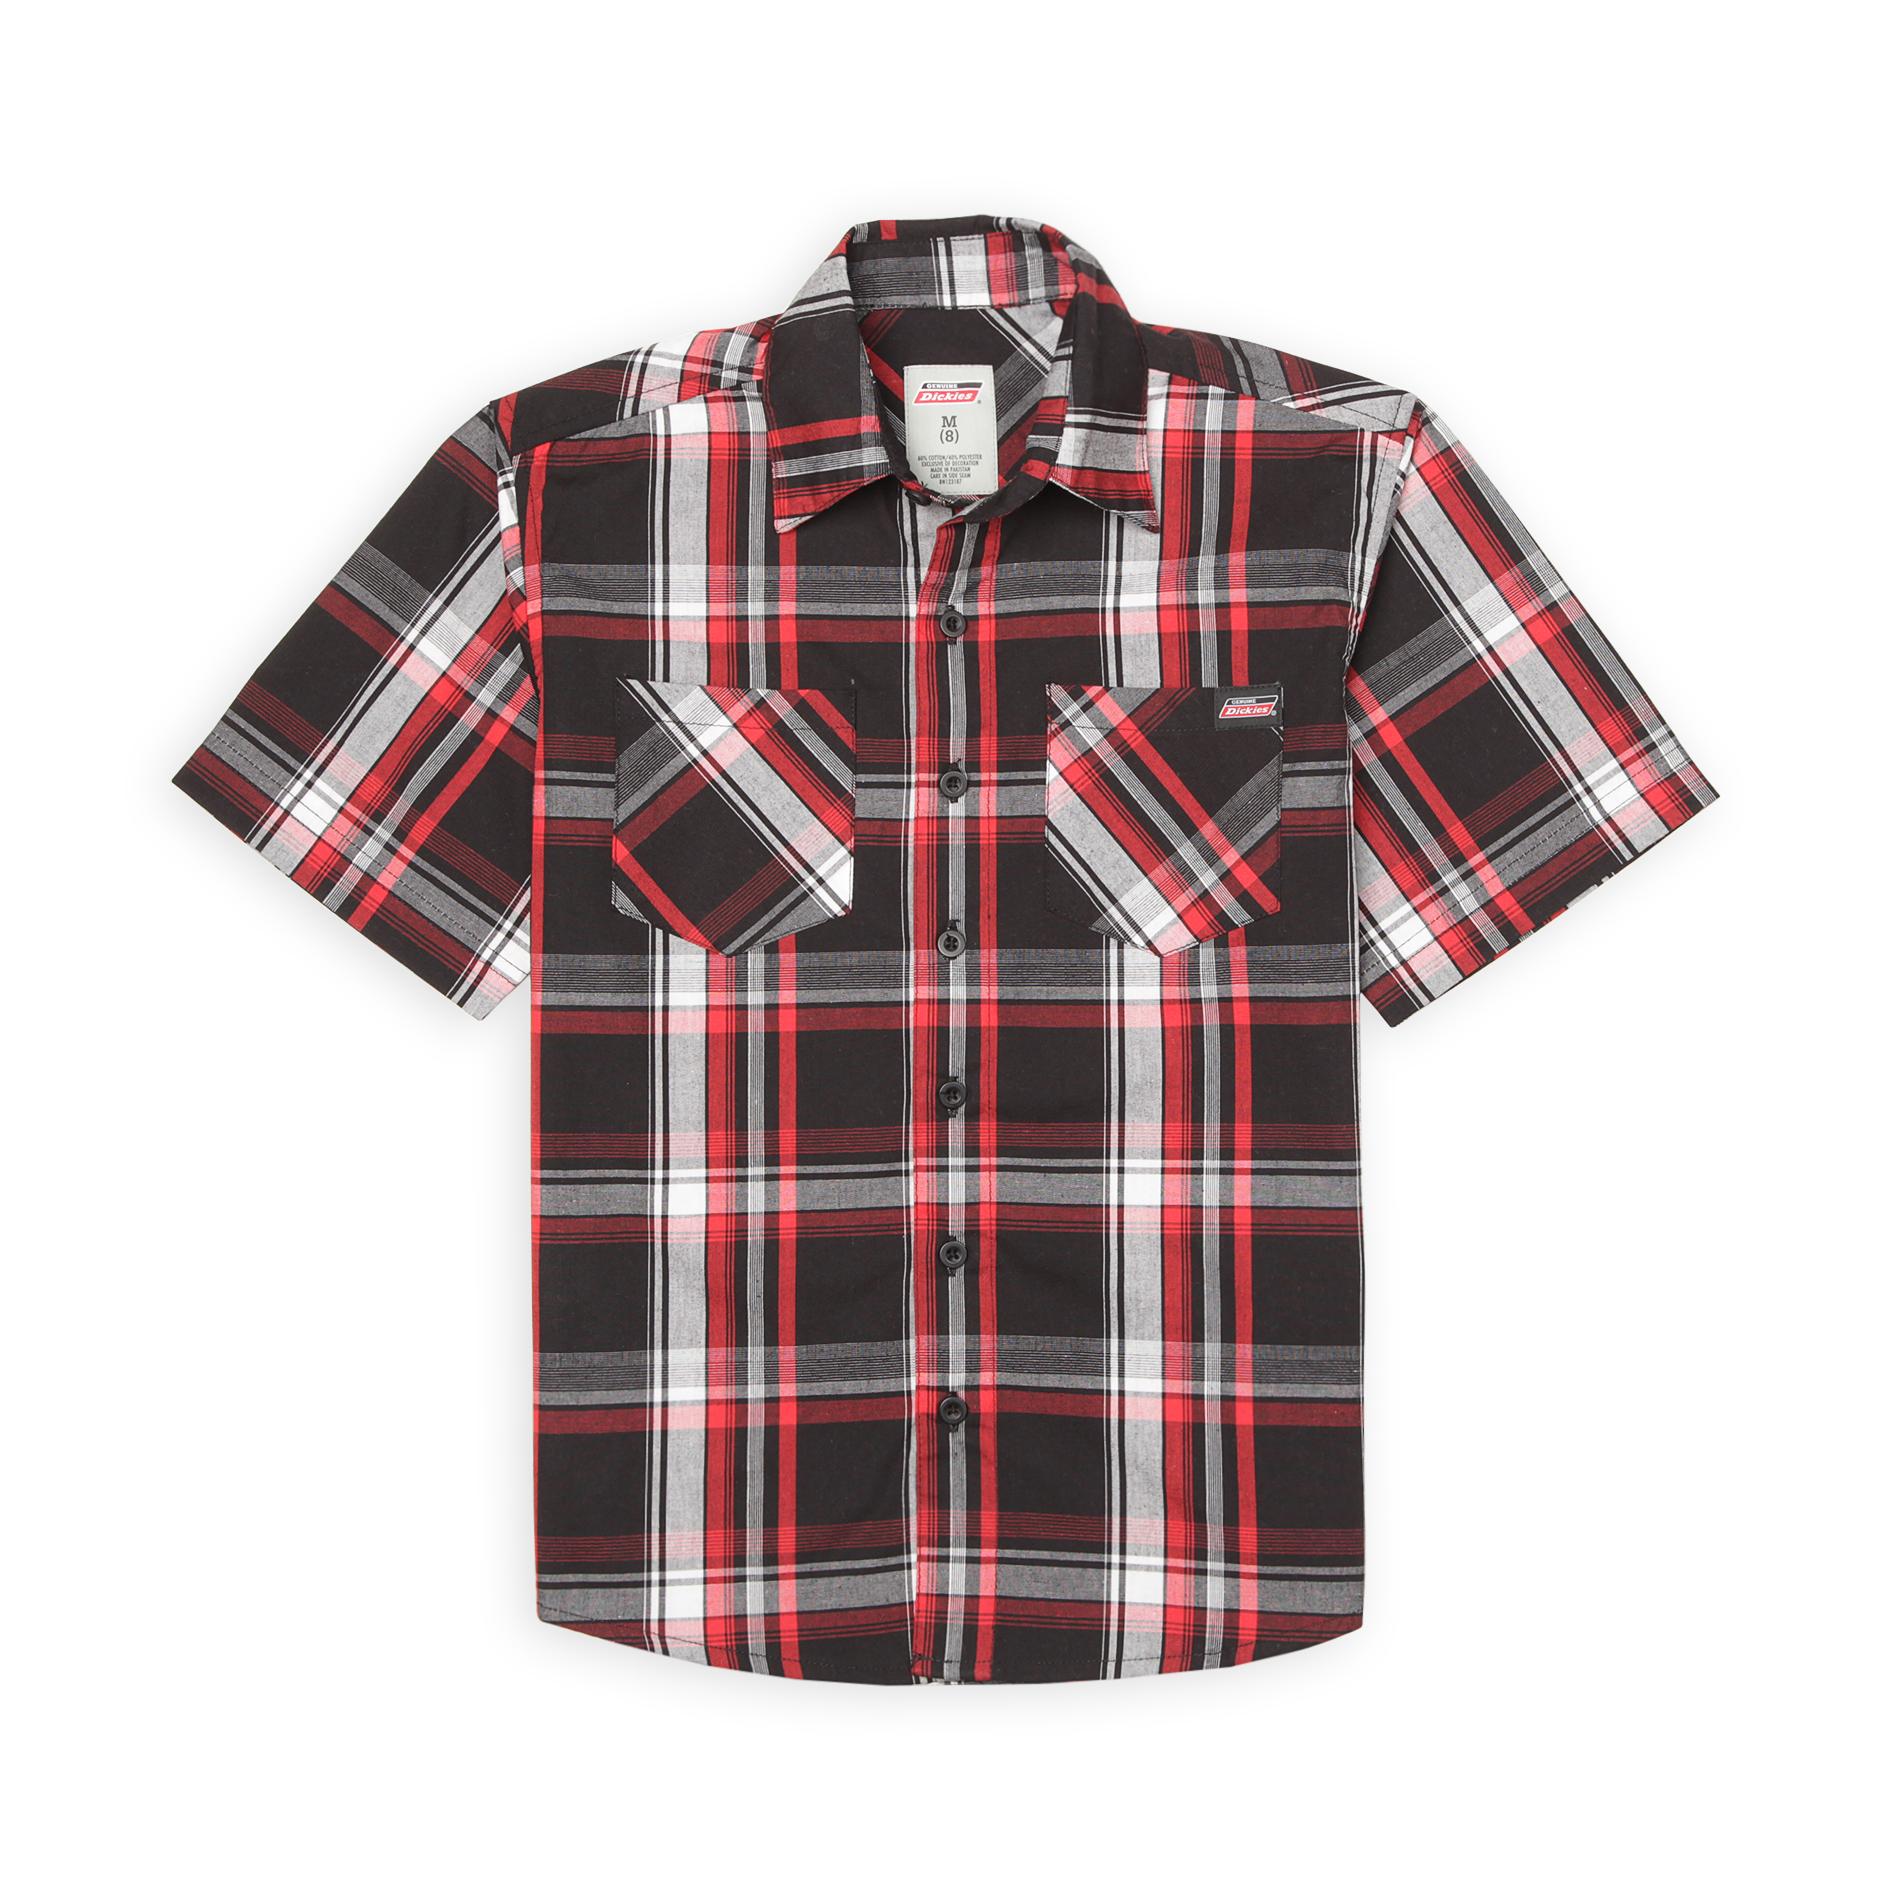 Genuine Dickies Boy's Short-Sleeve Button-Front Shirt - Plaid